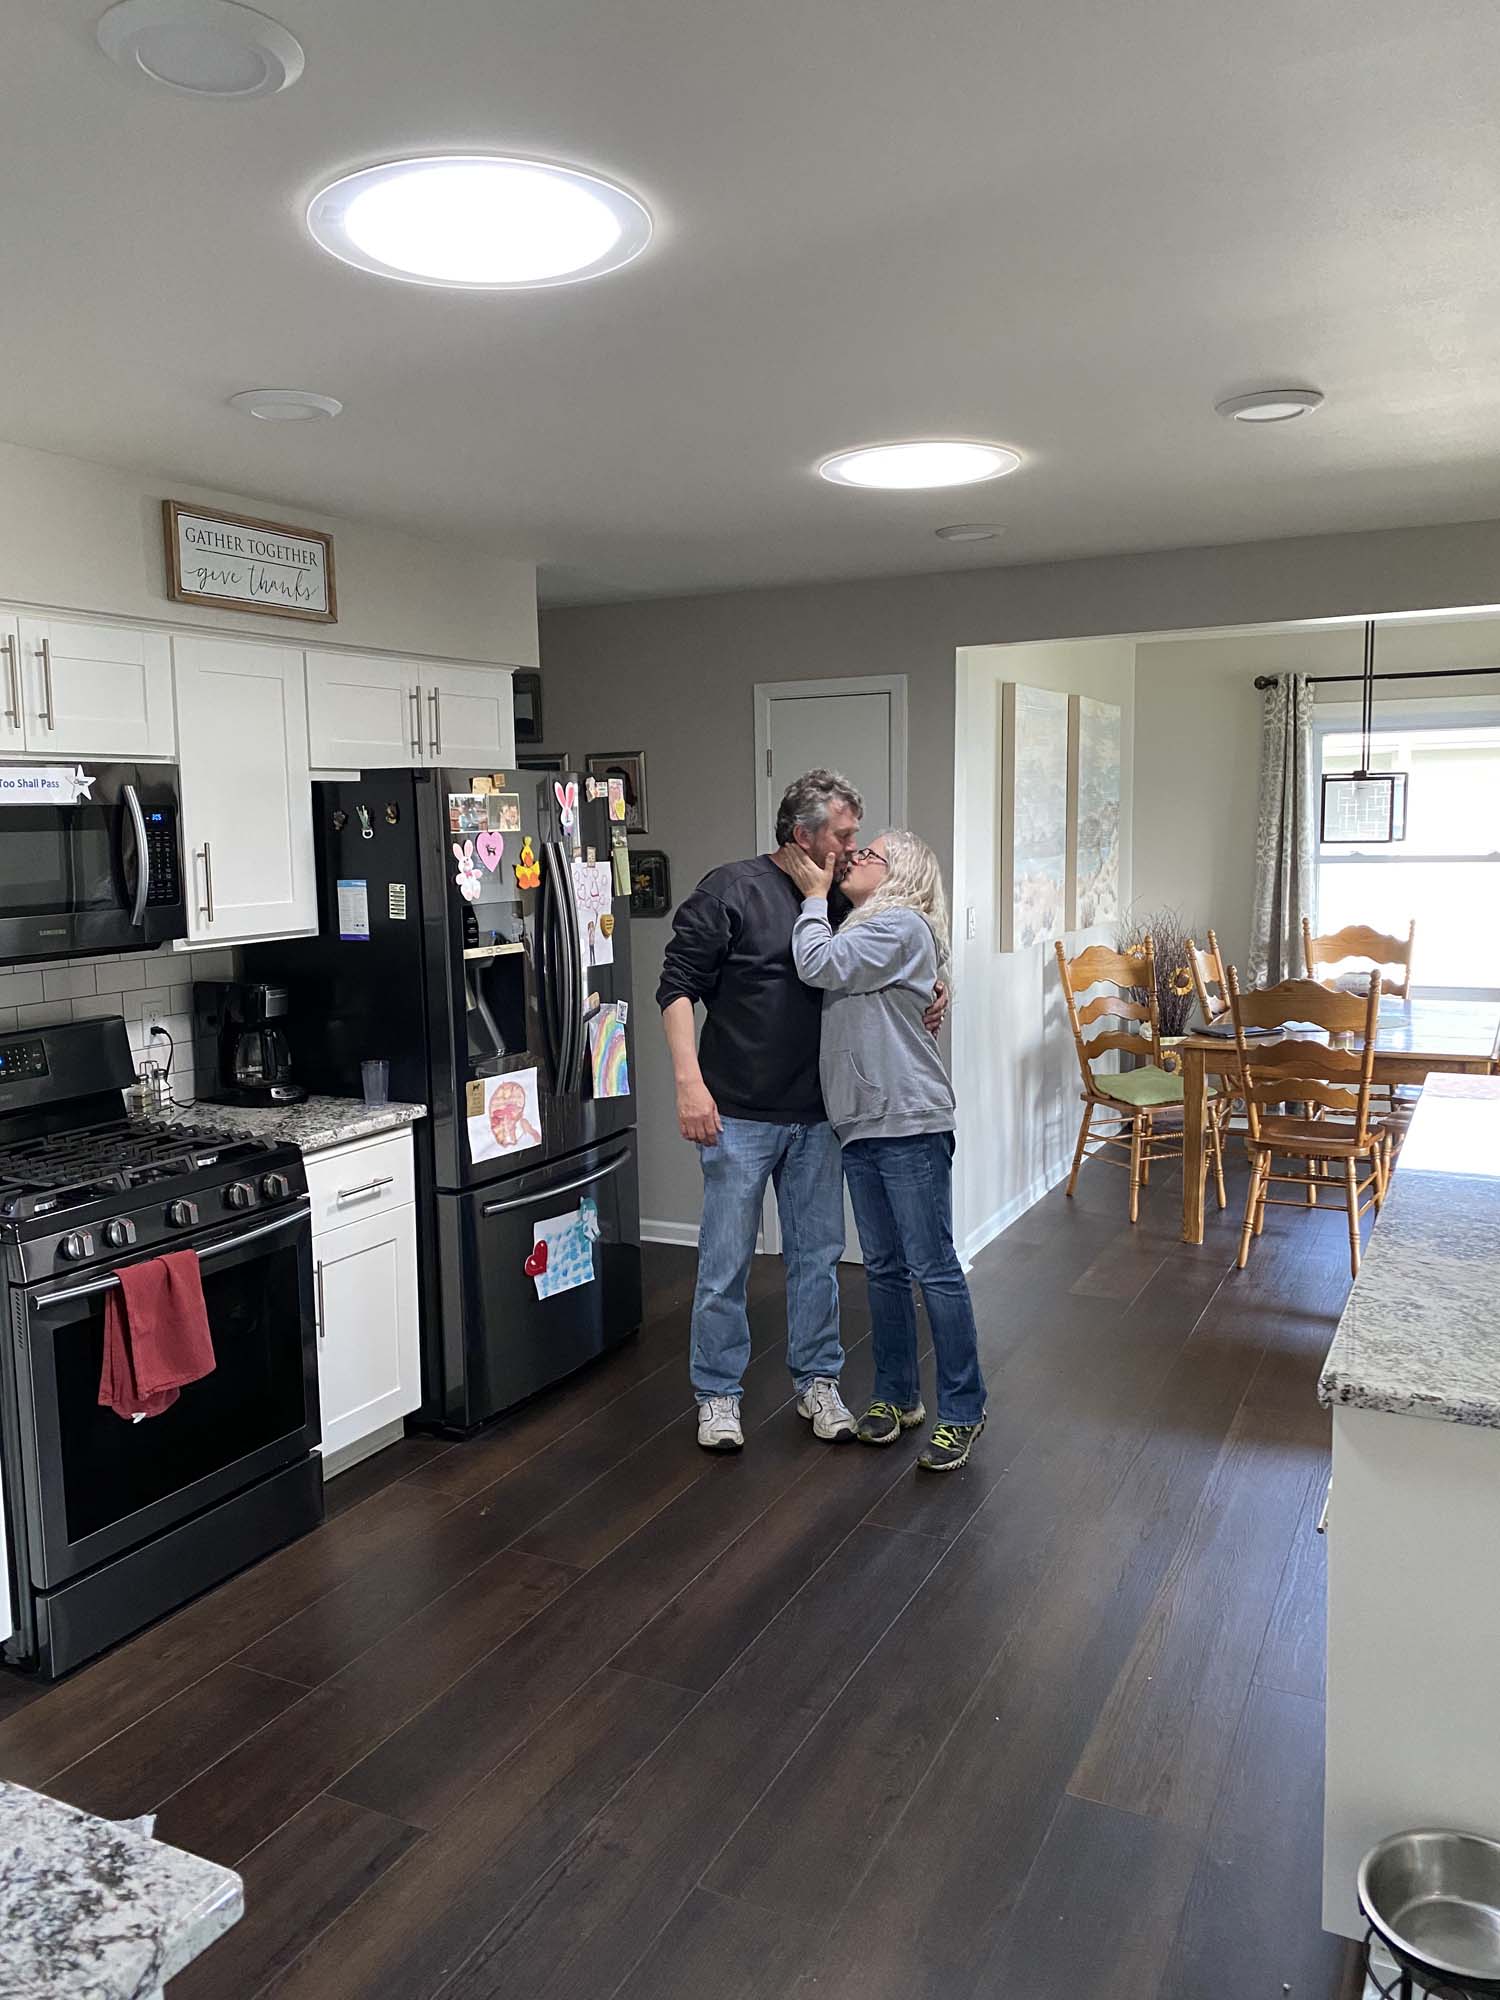 Husband & wife kisses underneath pair of new circular kitchen skylights